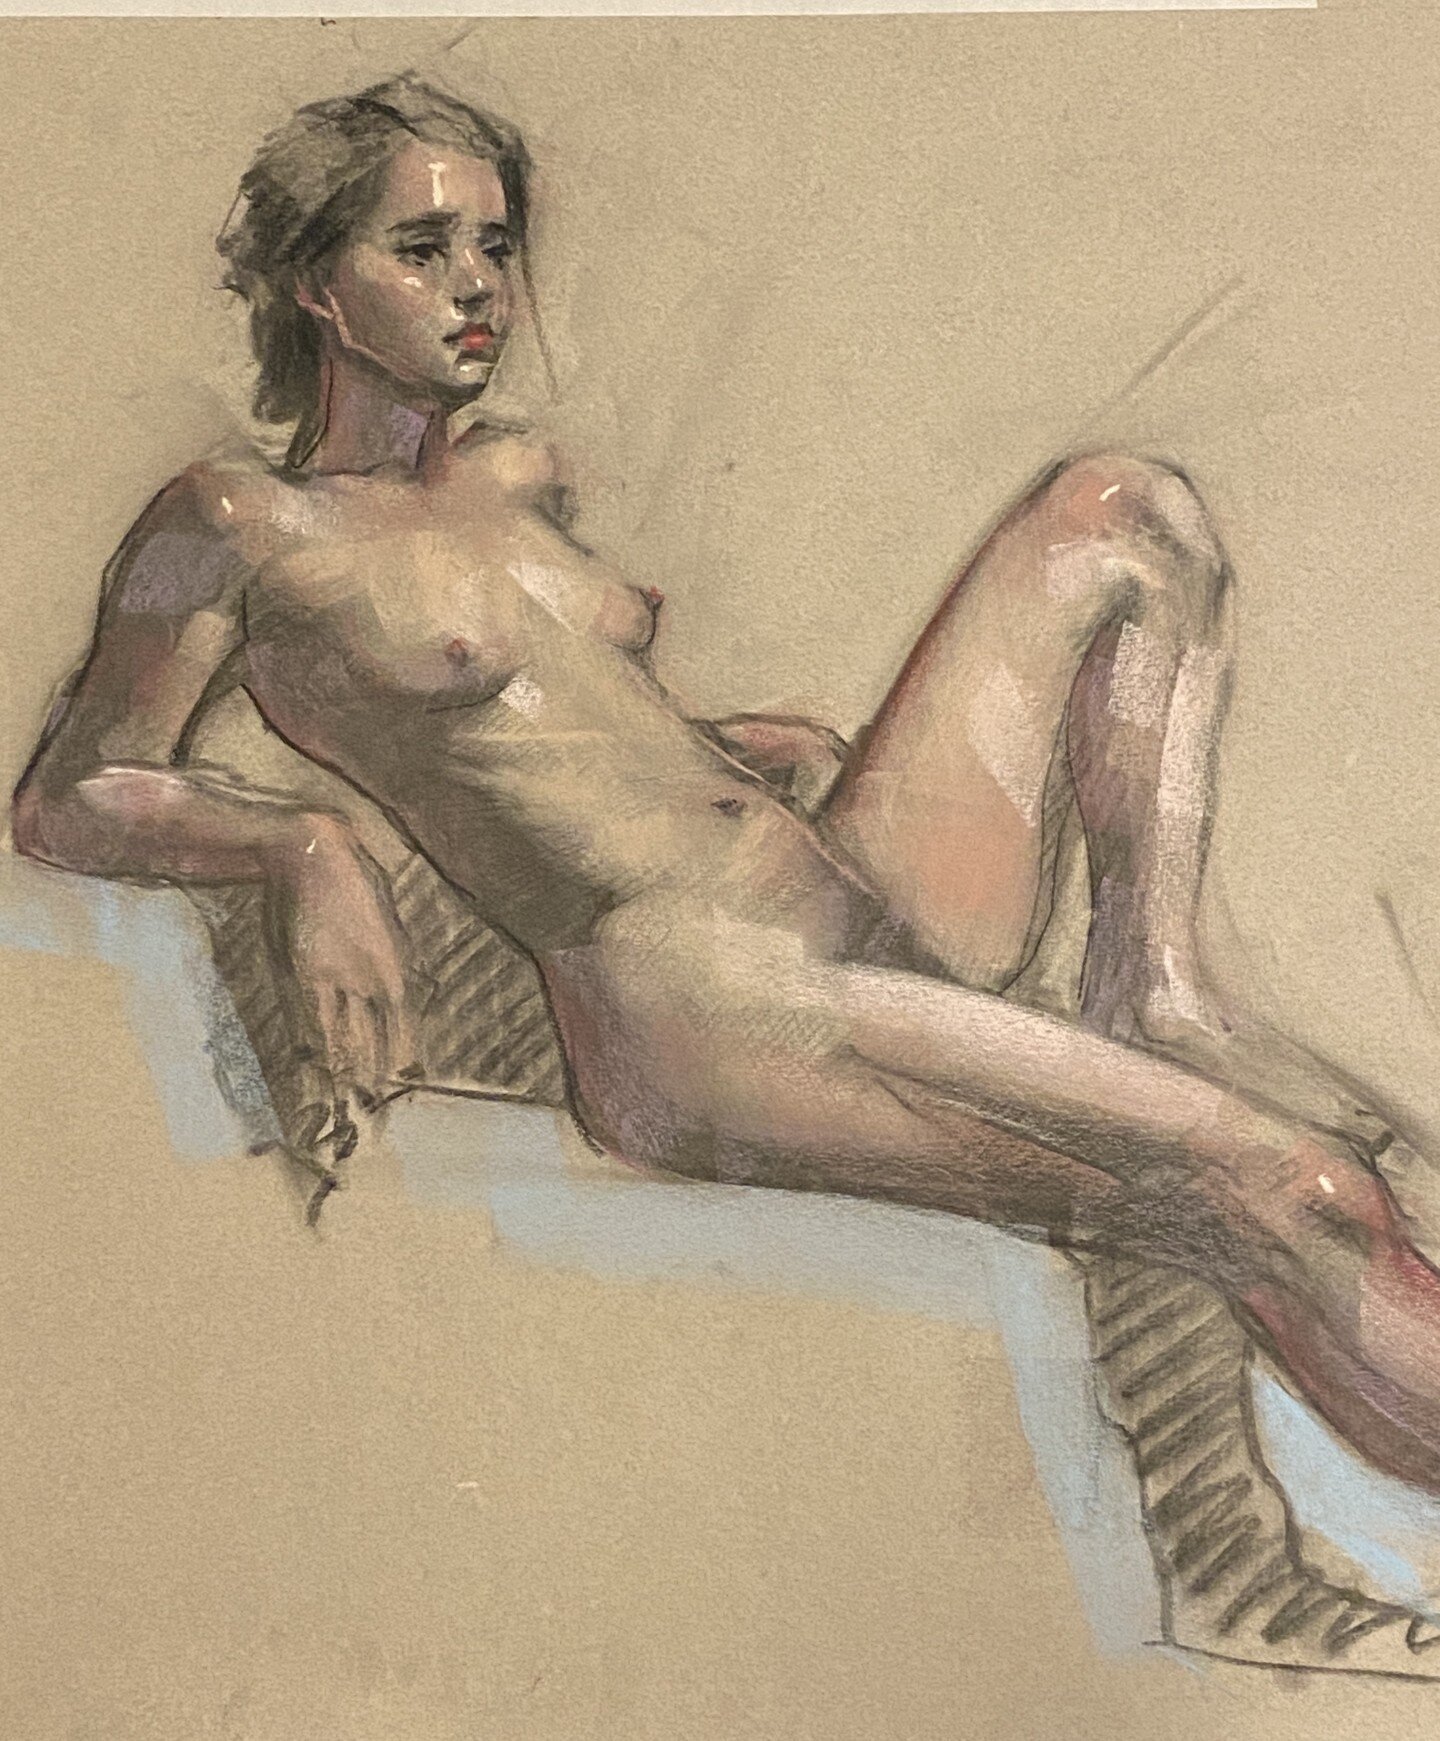 Marissa in her last pose of the life drawing workshop, where we added pastels to our charcoal drawings. I'm sorry the class is over, and @patient_unfolding was wonderful in her short and long poses, which she recreated perfectly each week. However, n